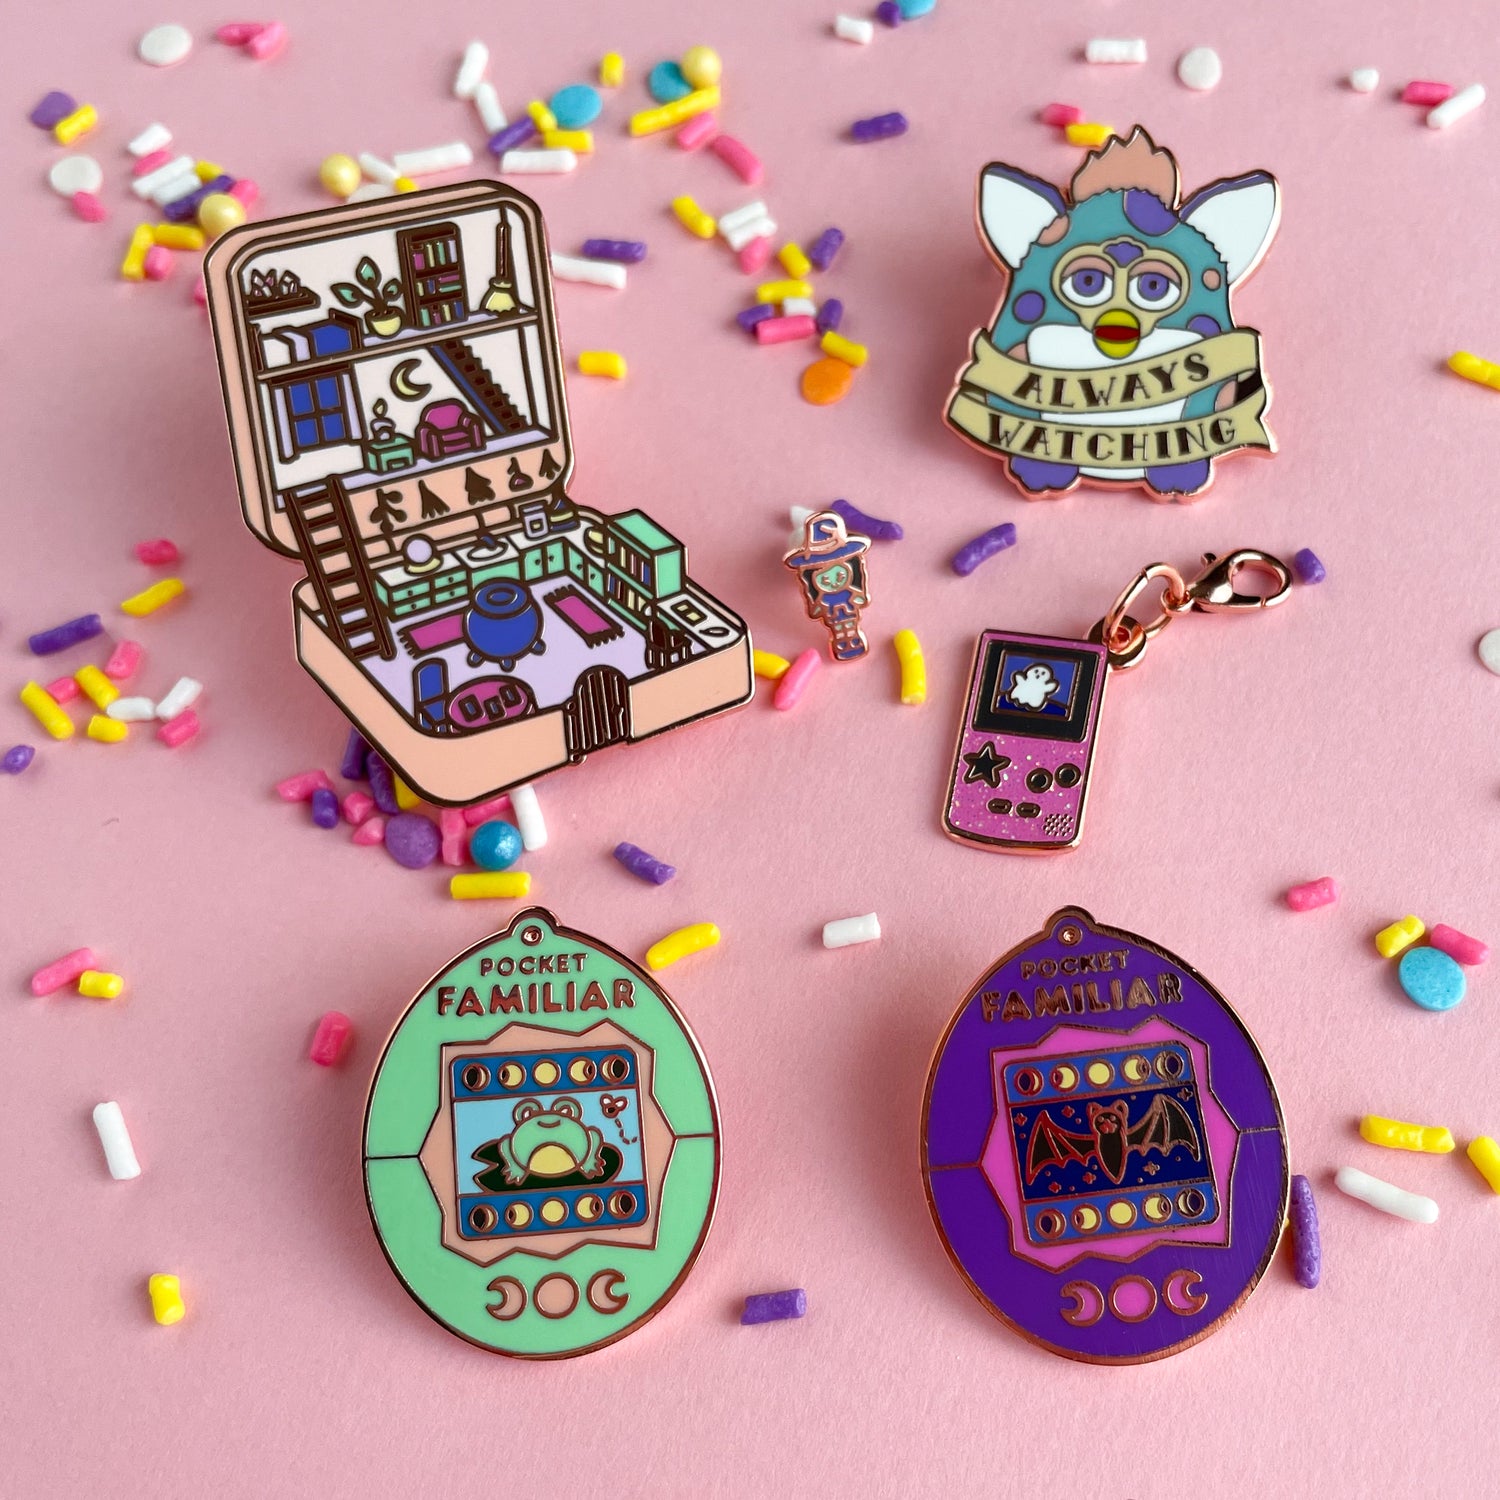 Several enamel pins on a pink background covered in pastel sprinkles. The pins are shaped like a Furby toy, a gameboy, a vintage Polly Pocket, and some tamagotchi toys.